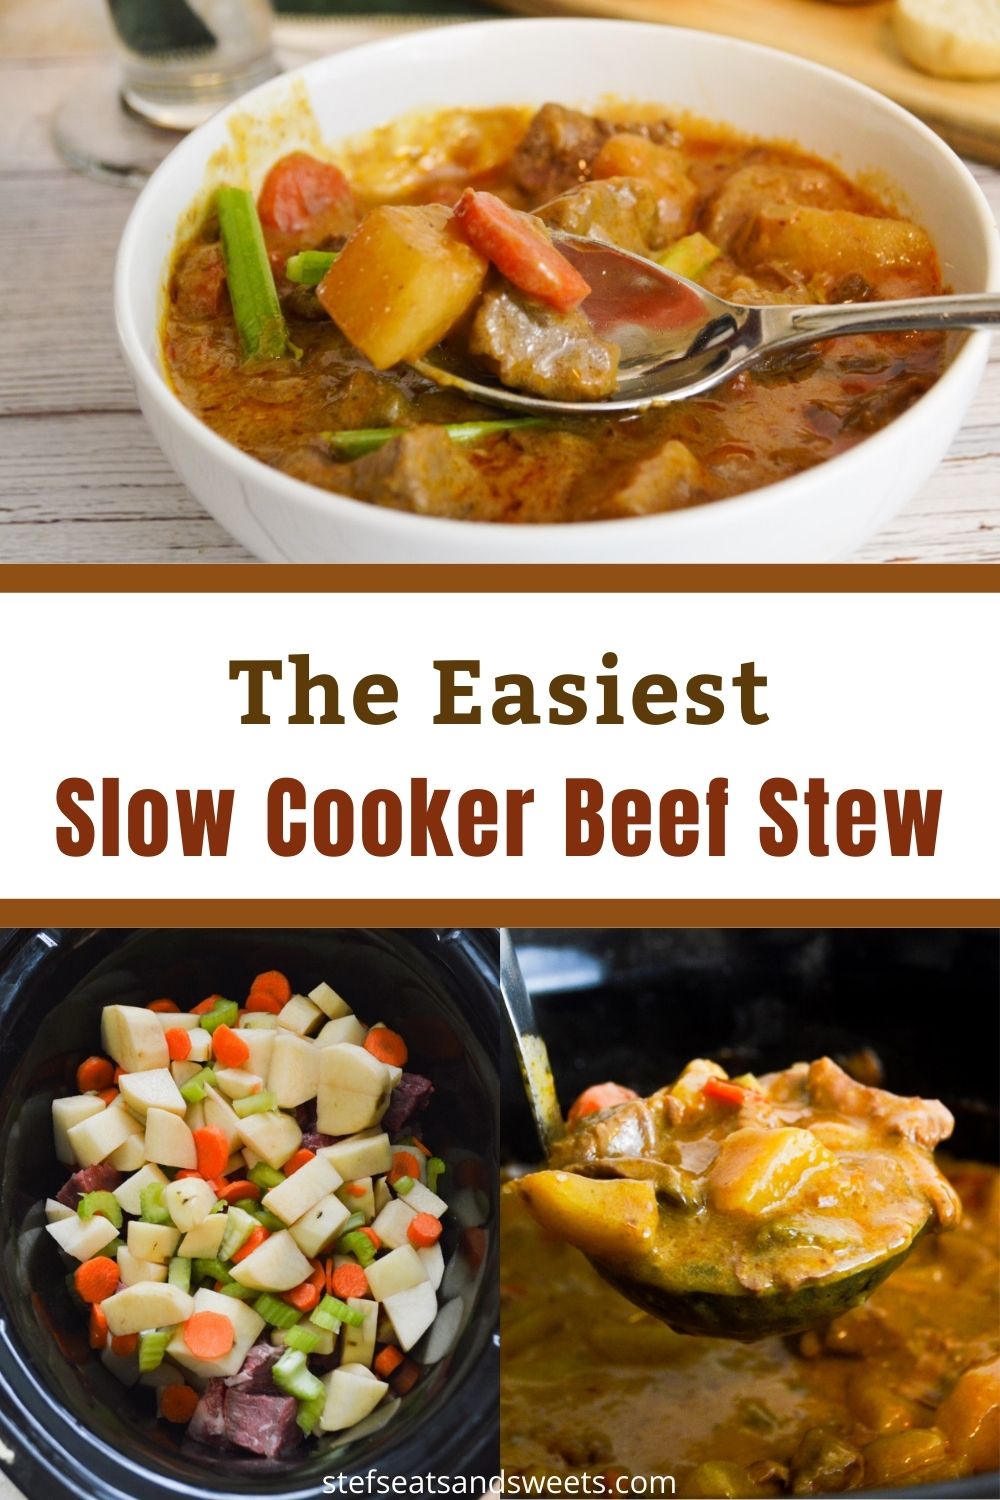 The Easiest Slow Cooker Beef Stew - Stef's Eats and Sweets